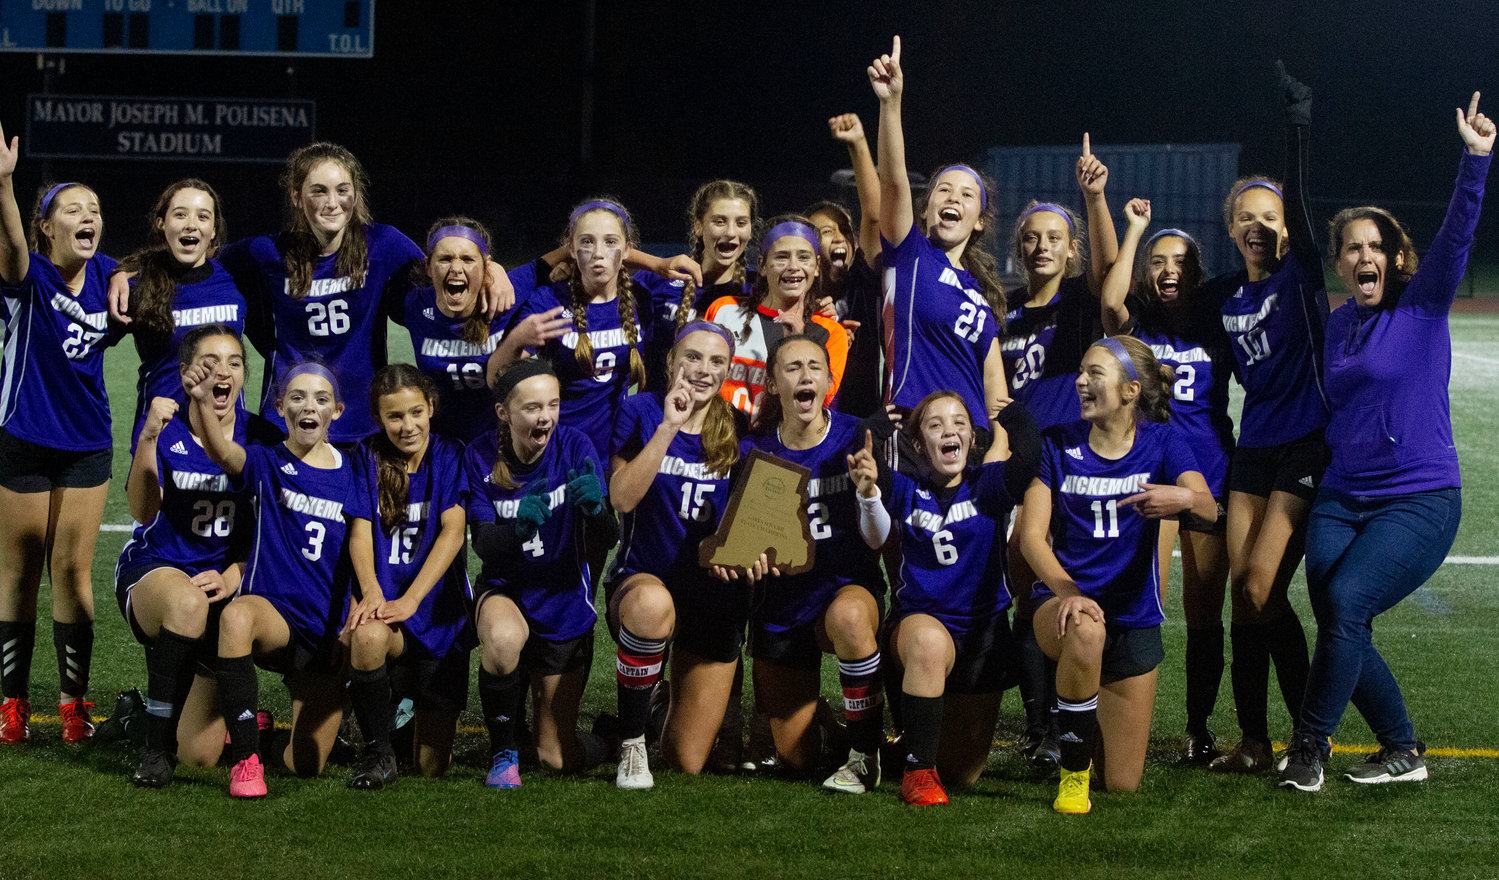 The team poses for the crowd with their championship plaque after defeating Gallagher 2-0 in the middle school state championship.